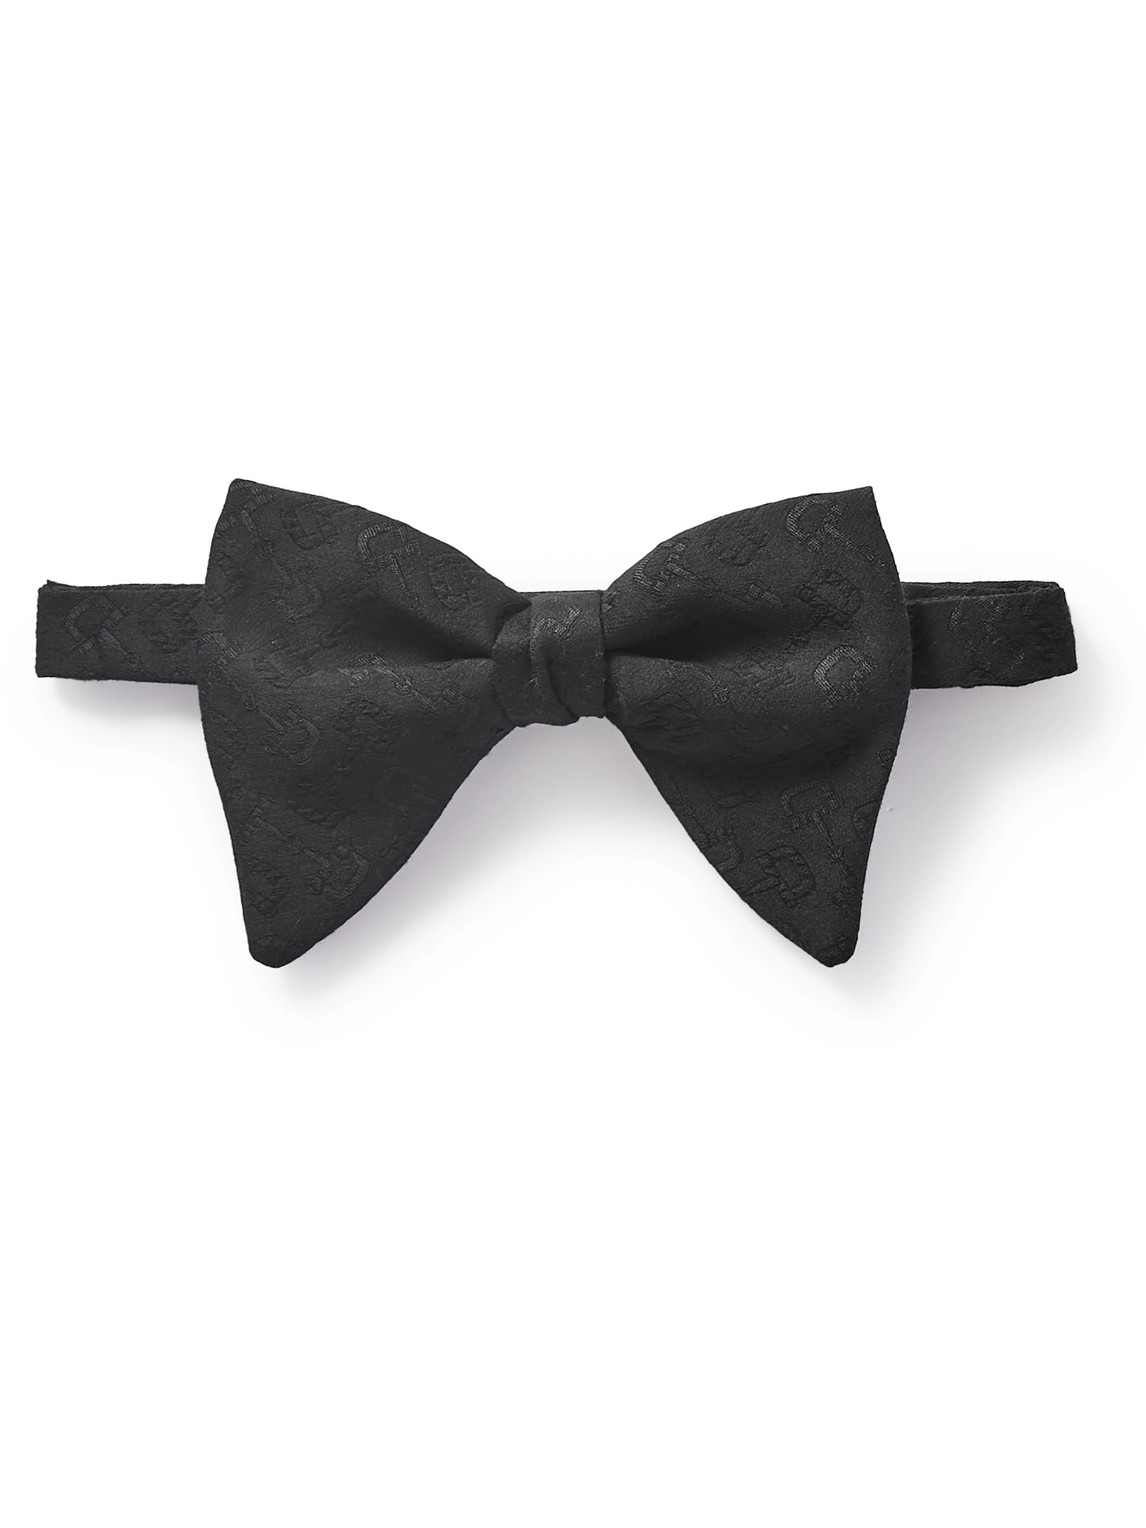 GUCCI PRE-TIED WOOL AND SILK-BLEND JACQUARD BOW TIE